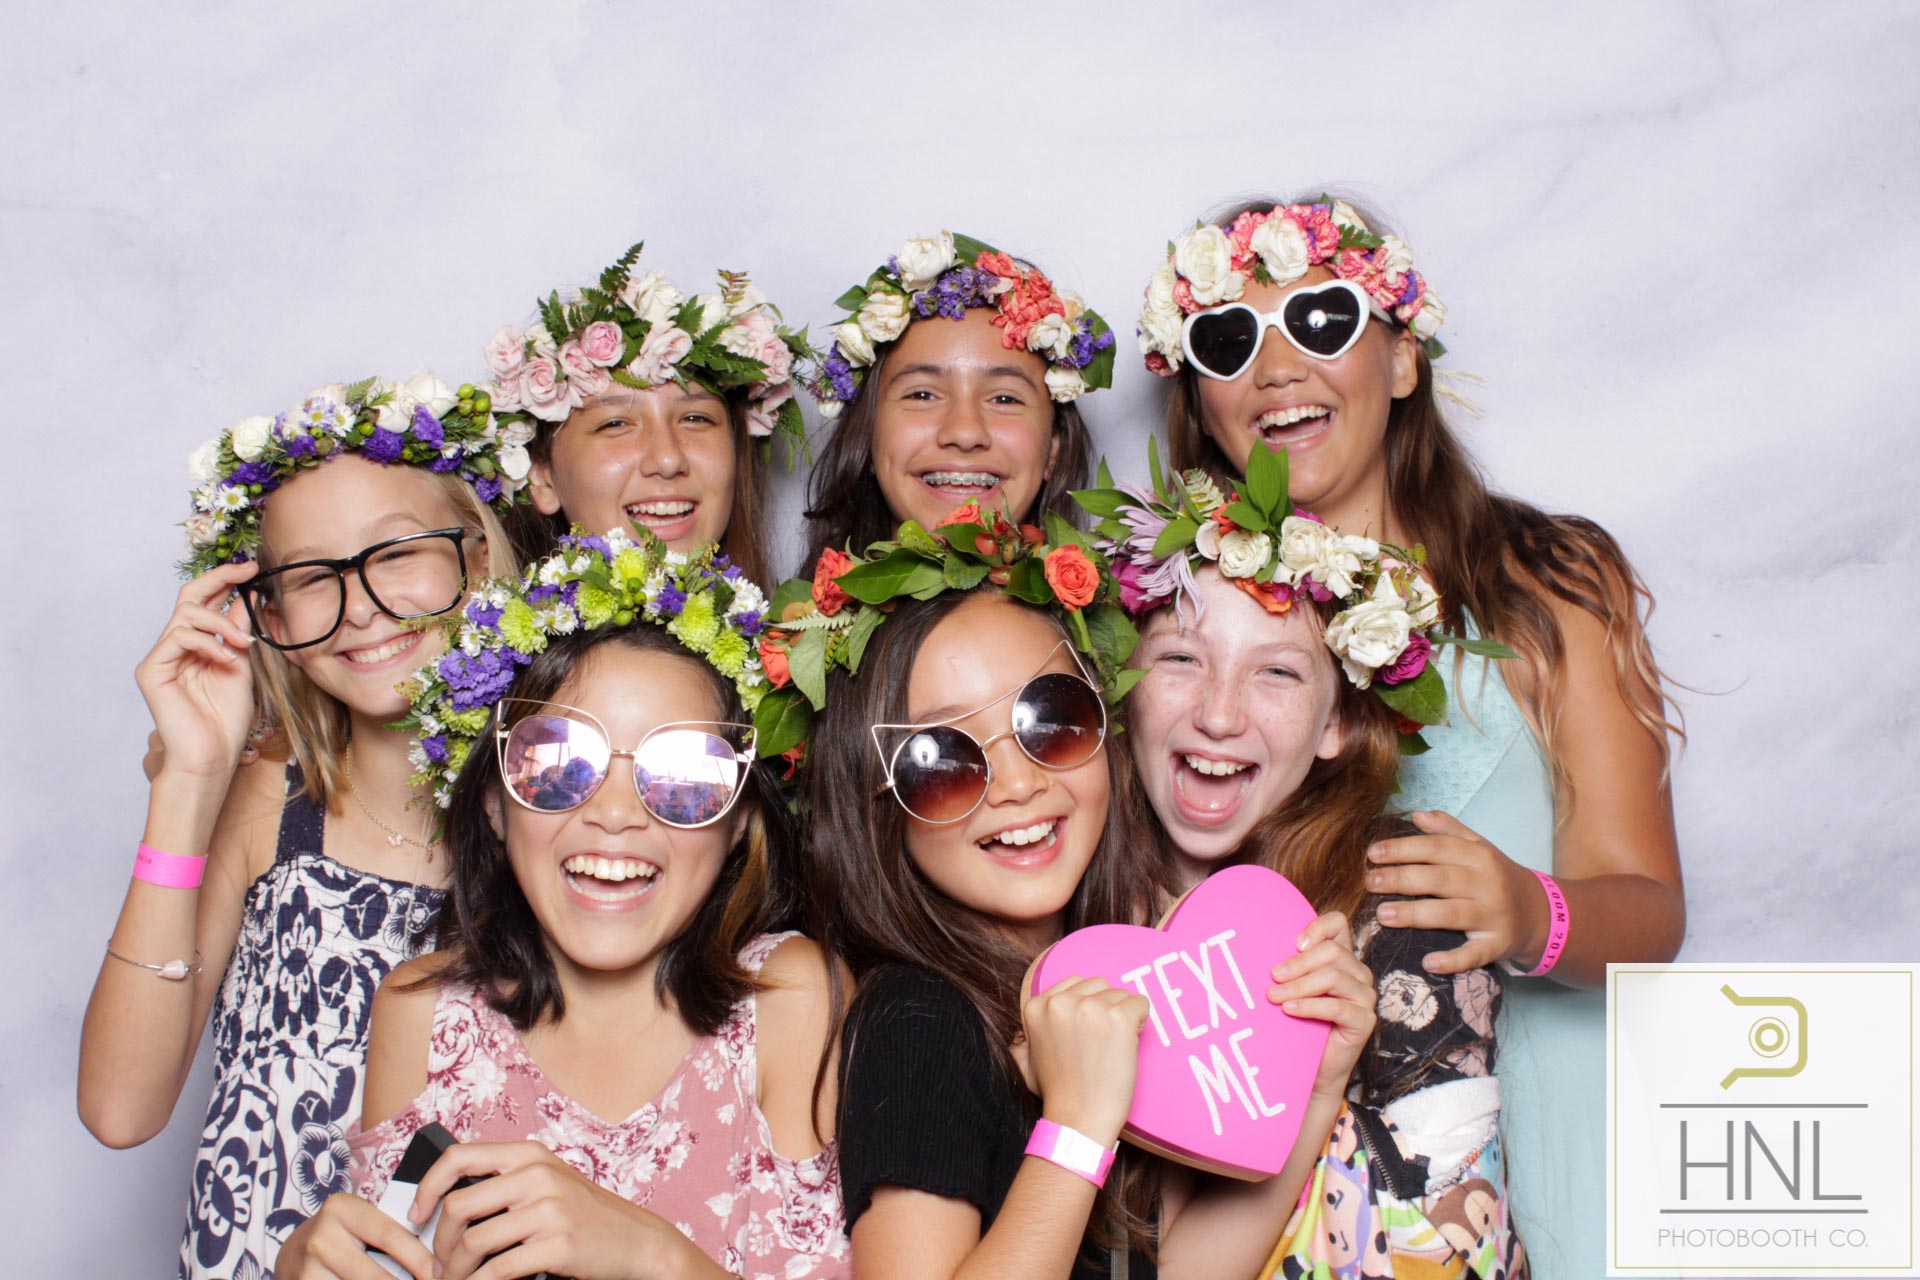 Bloom Conference Blaisdell Concert Hall Oahu Hawaii Photo Booth NEW-54.jpg